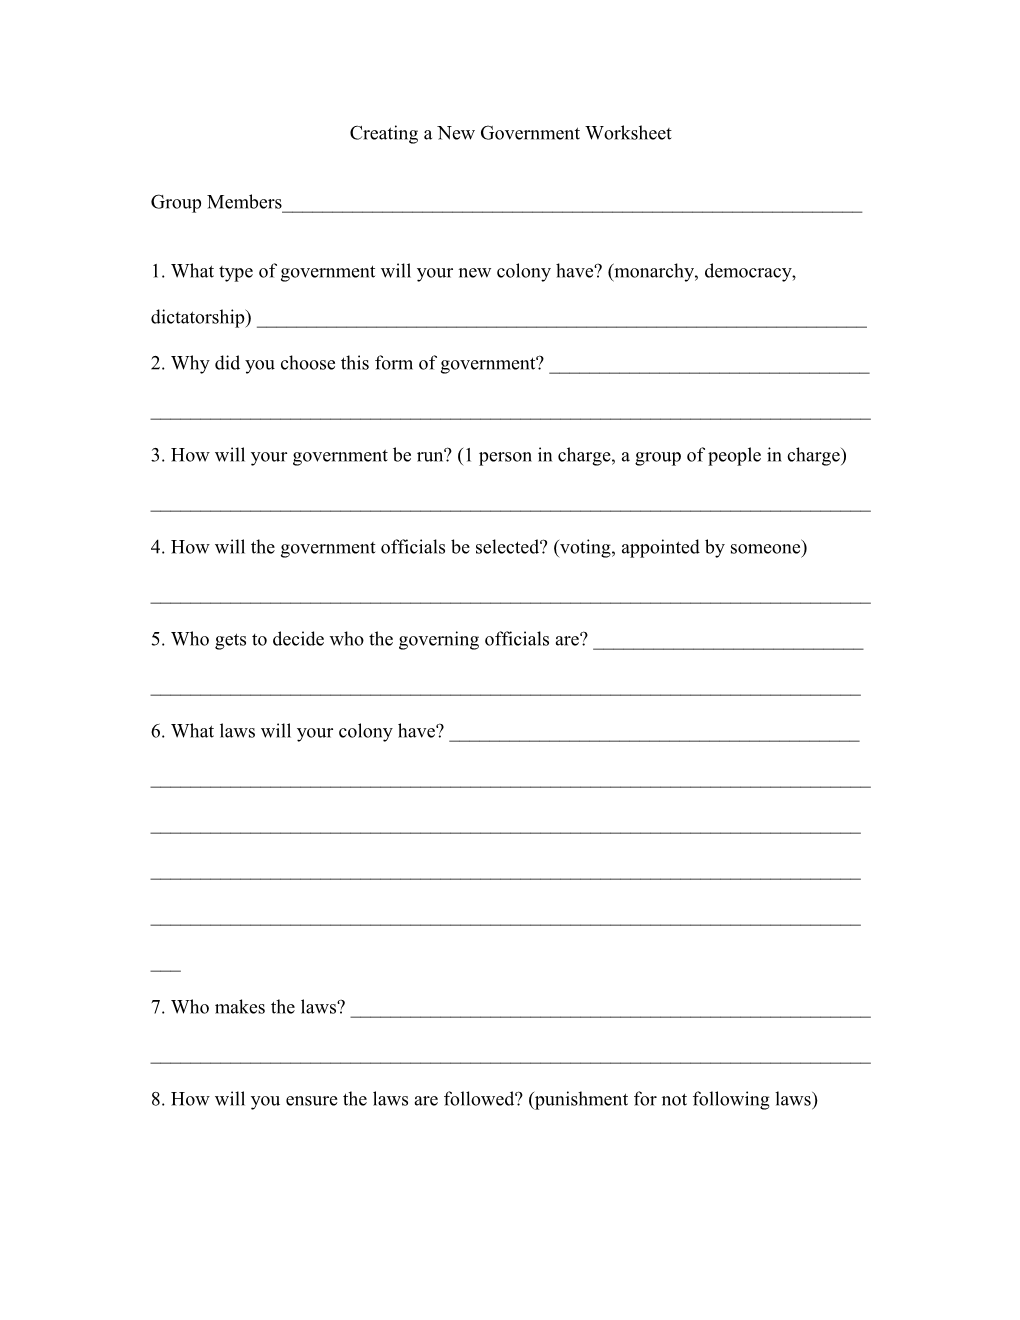 Creating A New Government Worksheet